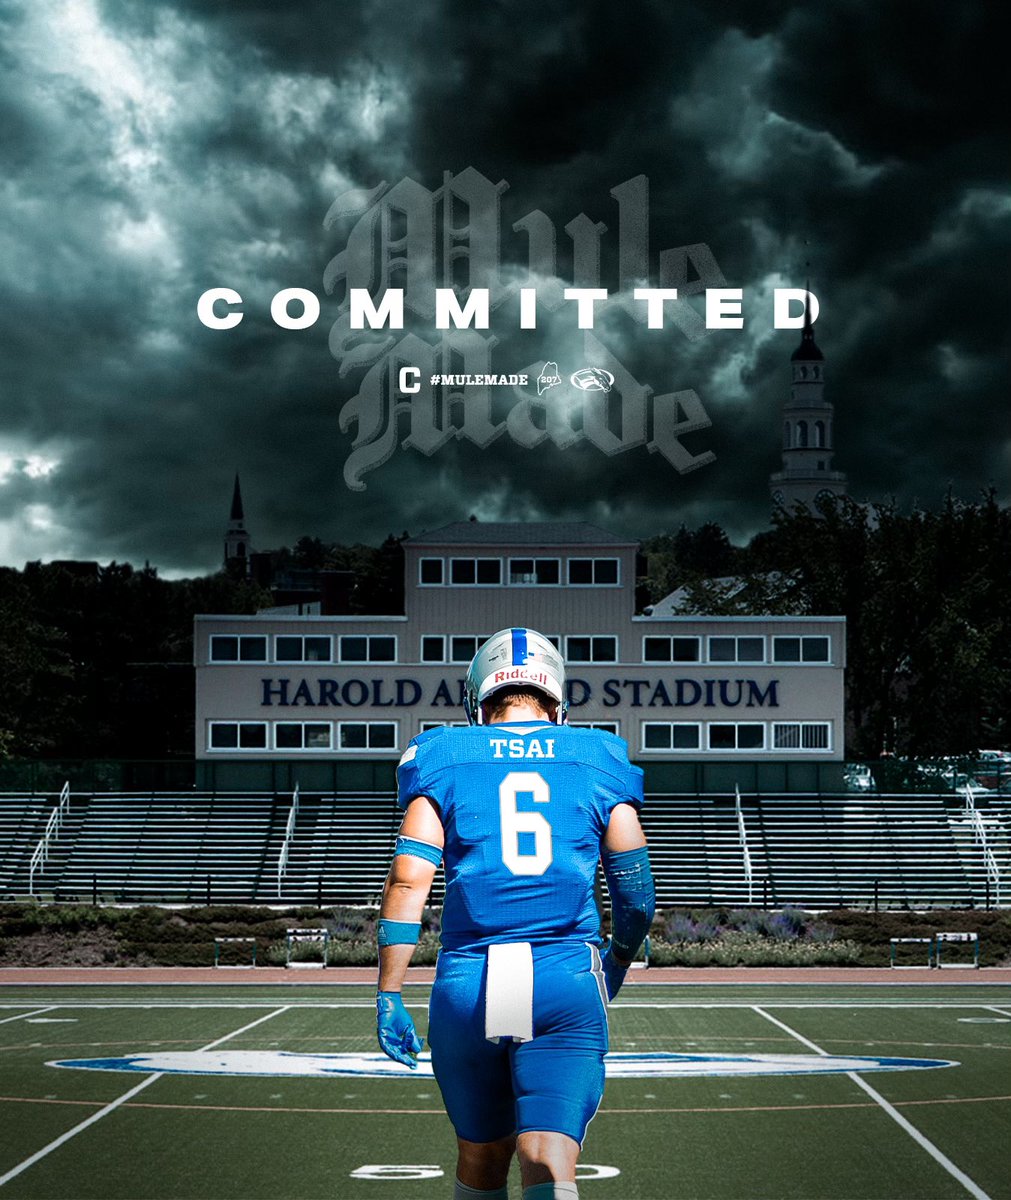 COMMITTED!!! I am proud to announce that I have committed to @Colby_Football ! I want to thank my family for supporting me and all the coaches that believed in me throughout the process! #MULEMADE 
@ColbyCoachCos @CoachSDwyer @westcoastpreps_ @CJacksonWCP @campocougfb @PGregorian